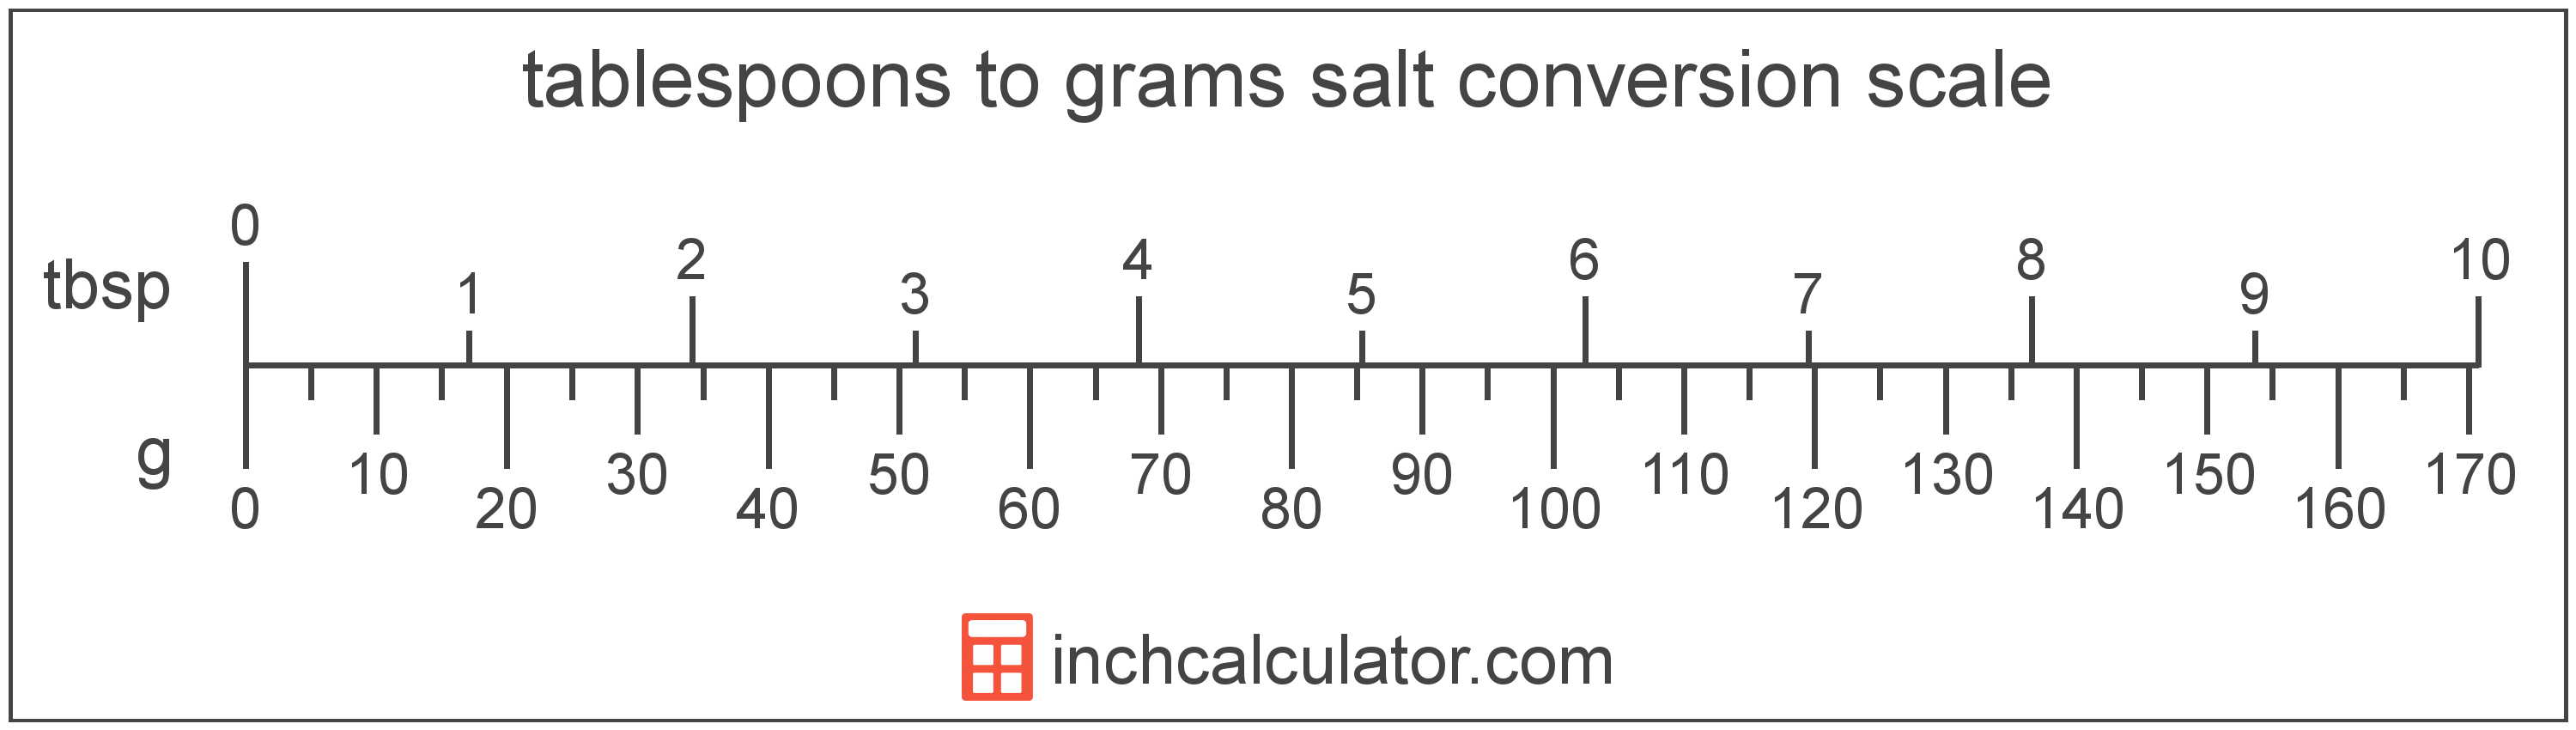 conversion scale showing grams and equivalent tablespoons salt volume values